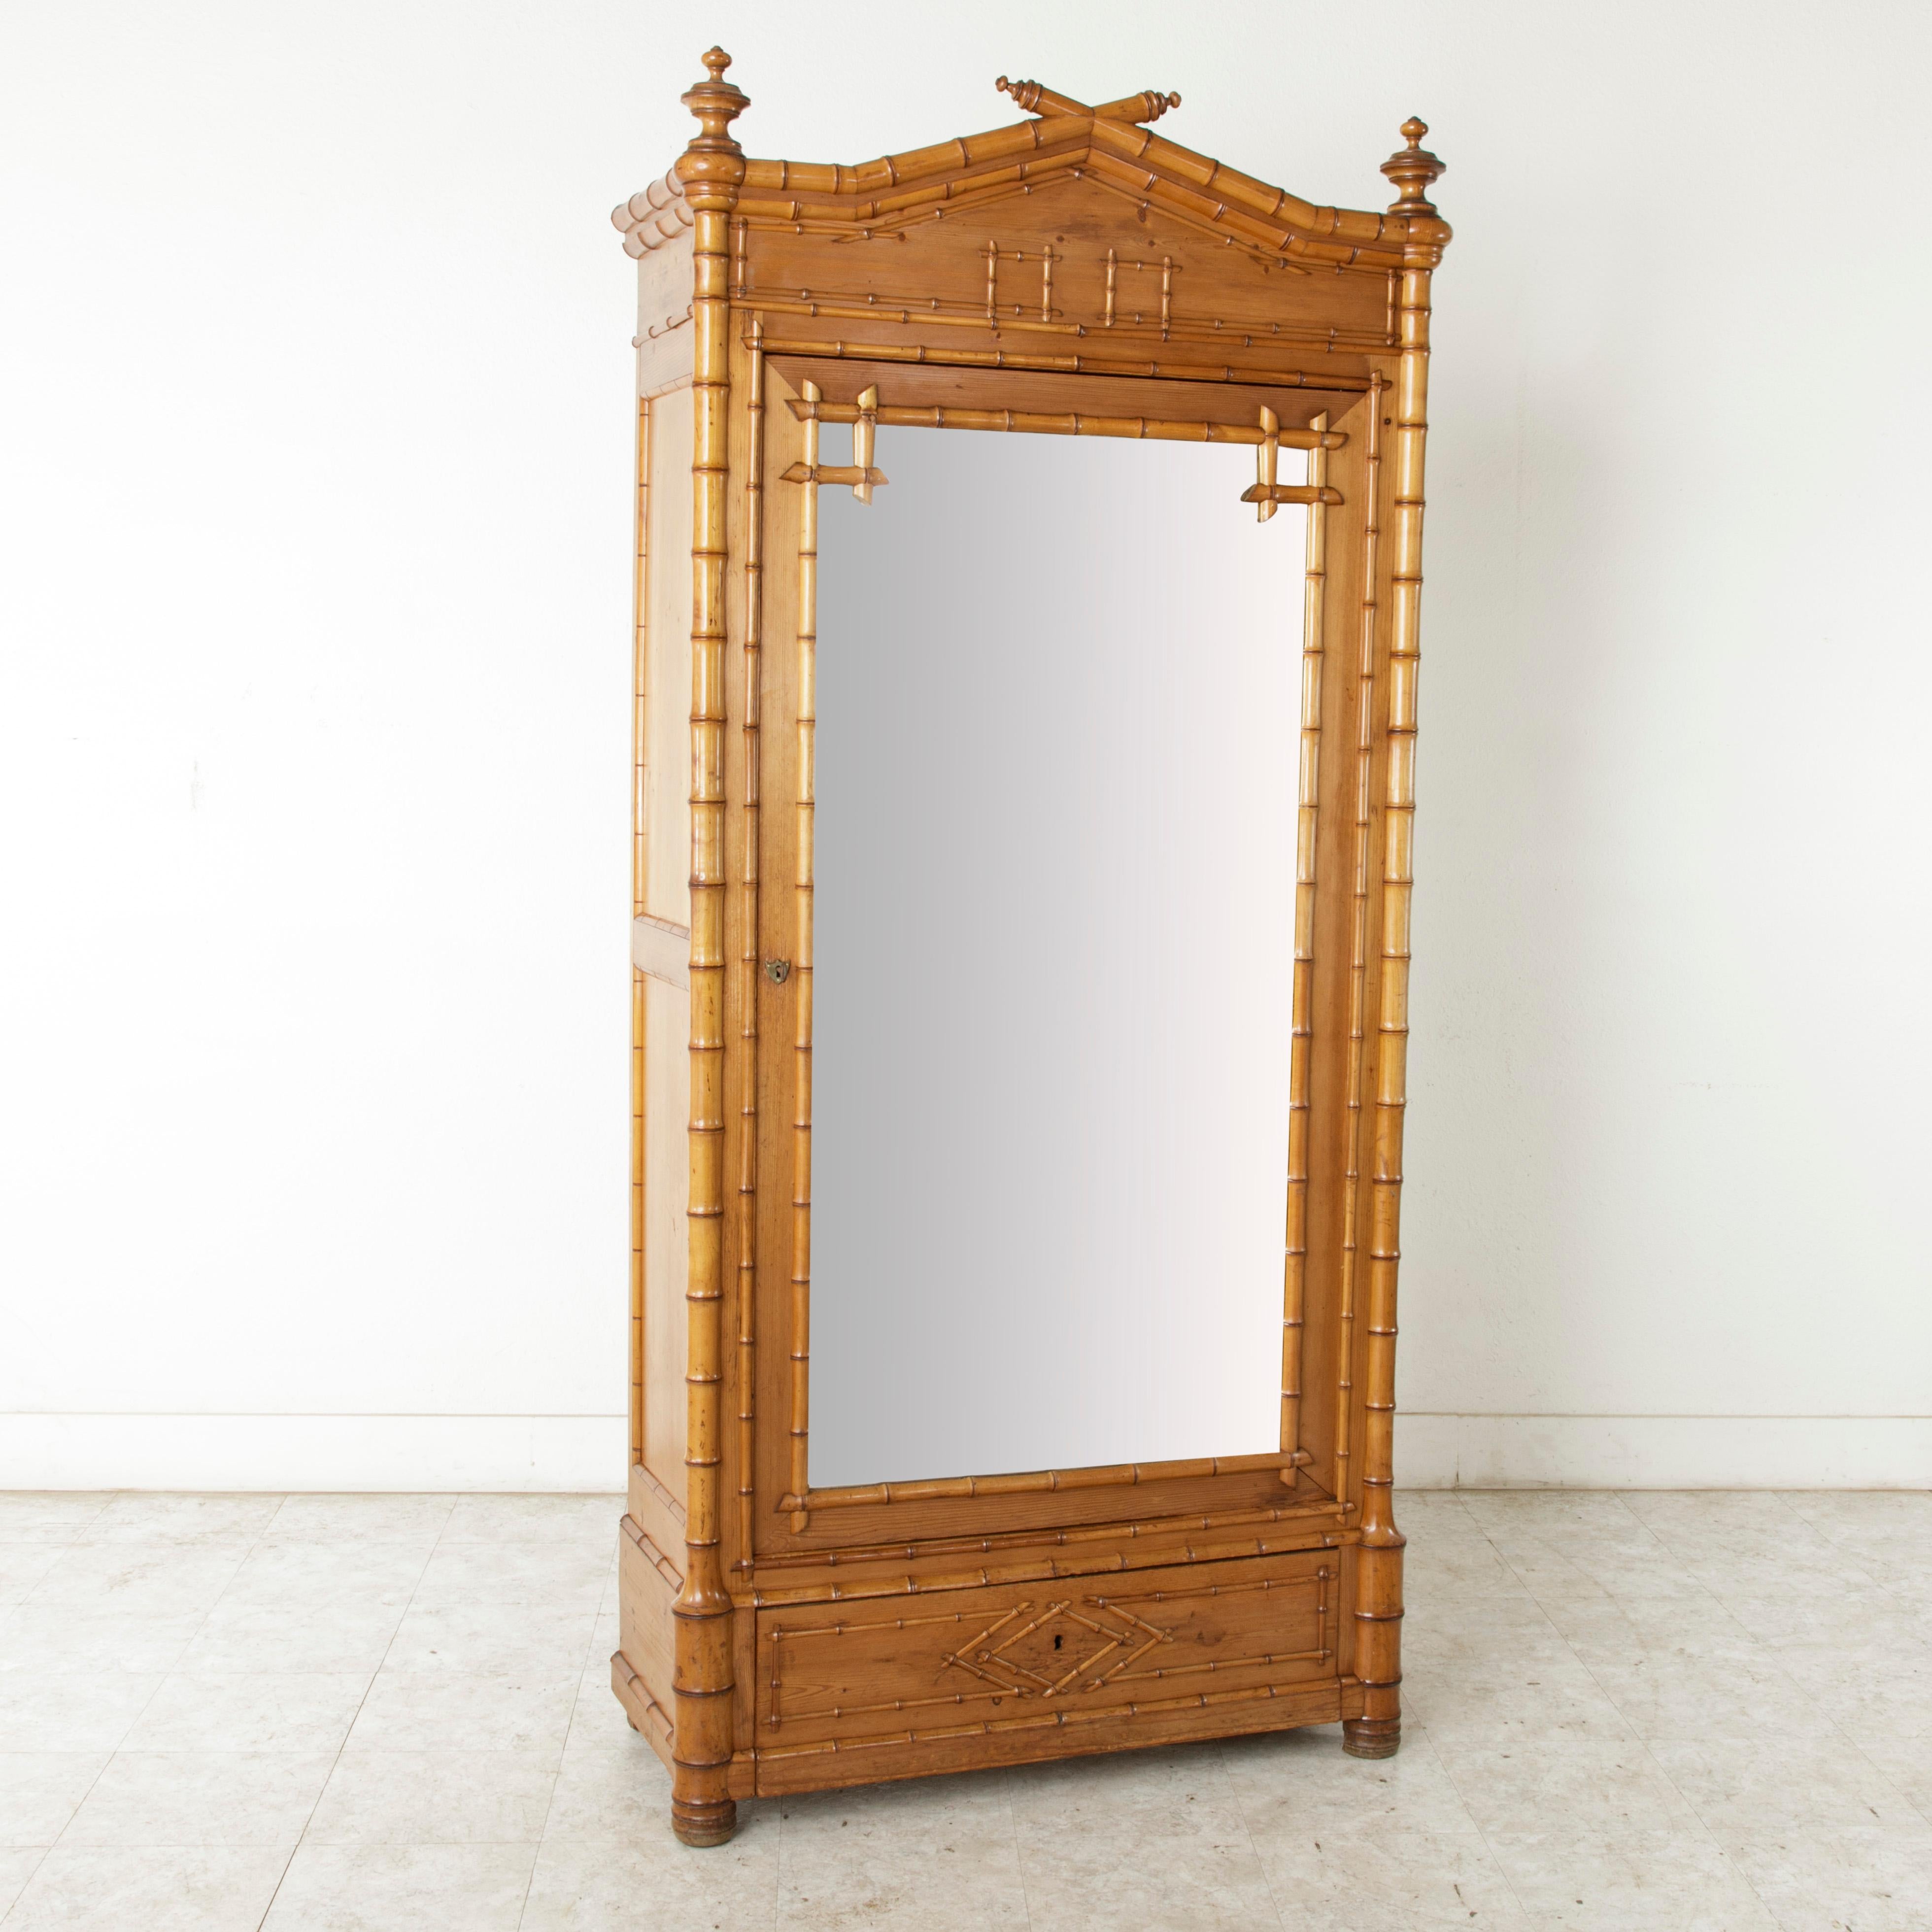 This French faux bamboo armoire is constructed of cherrywood and heartwood pine. Its finely detailed bamboo pieces, harmoniously laid in a uniform pattern, blend with the handsome geometric motif in the upper pediment and lower drawer front.